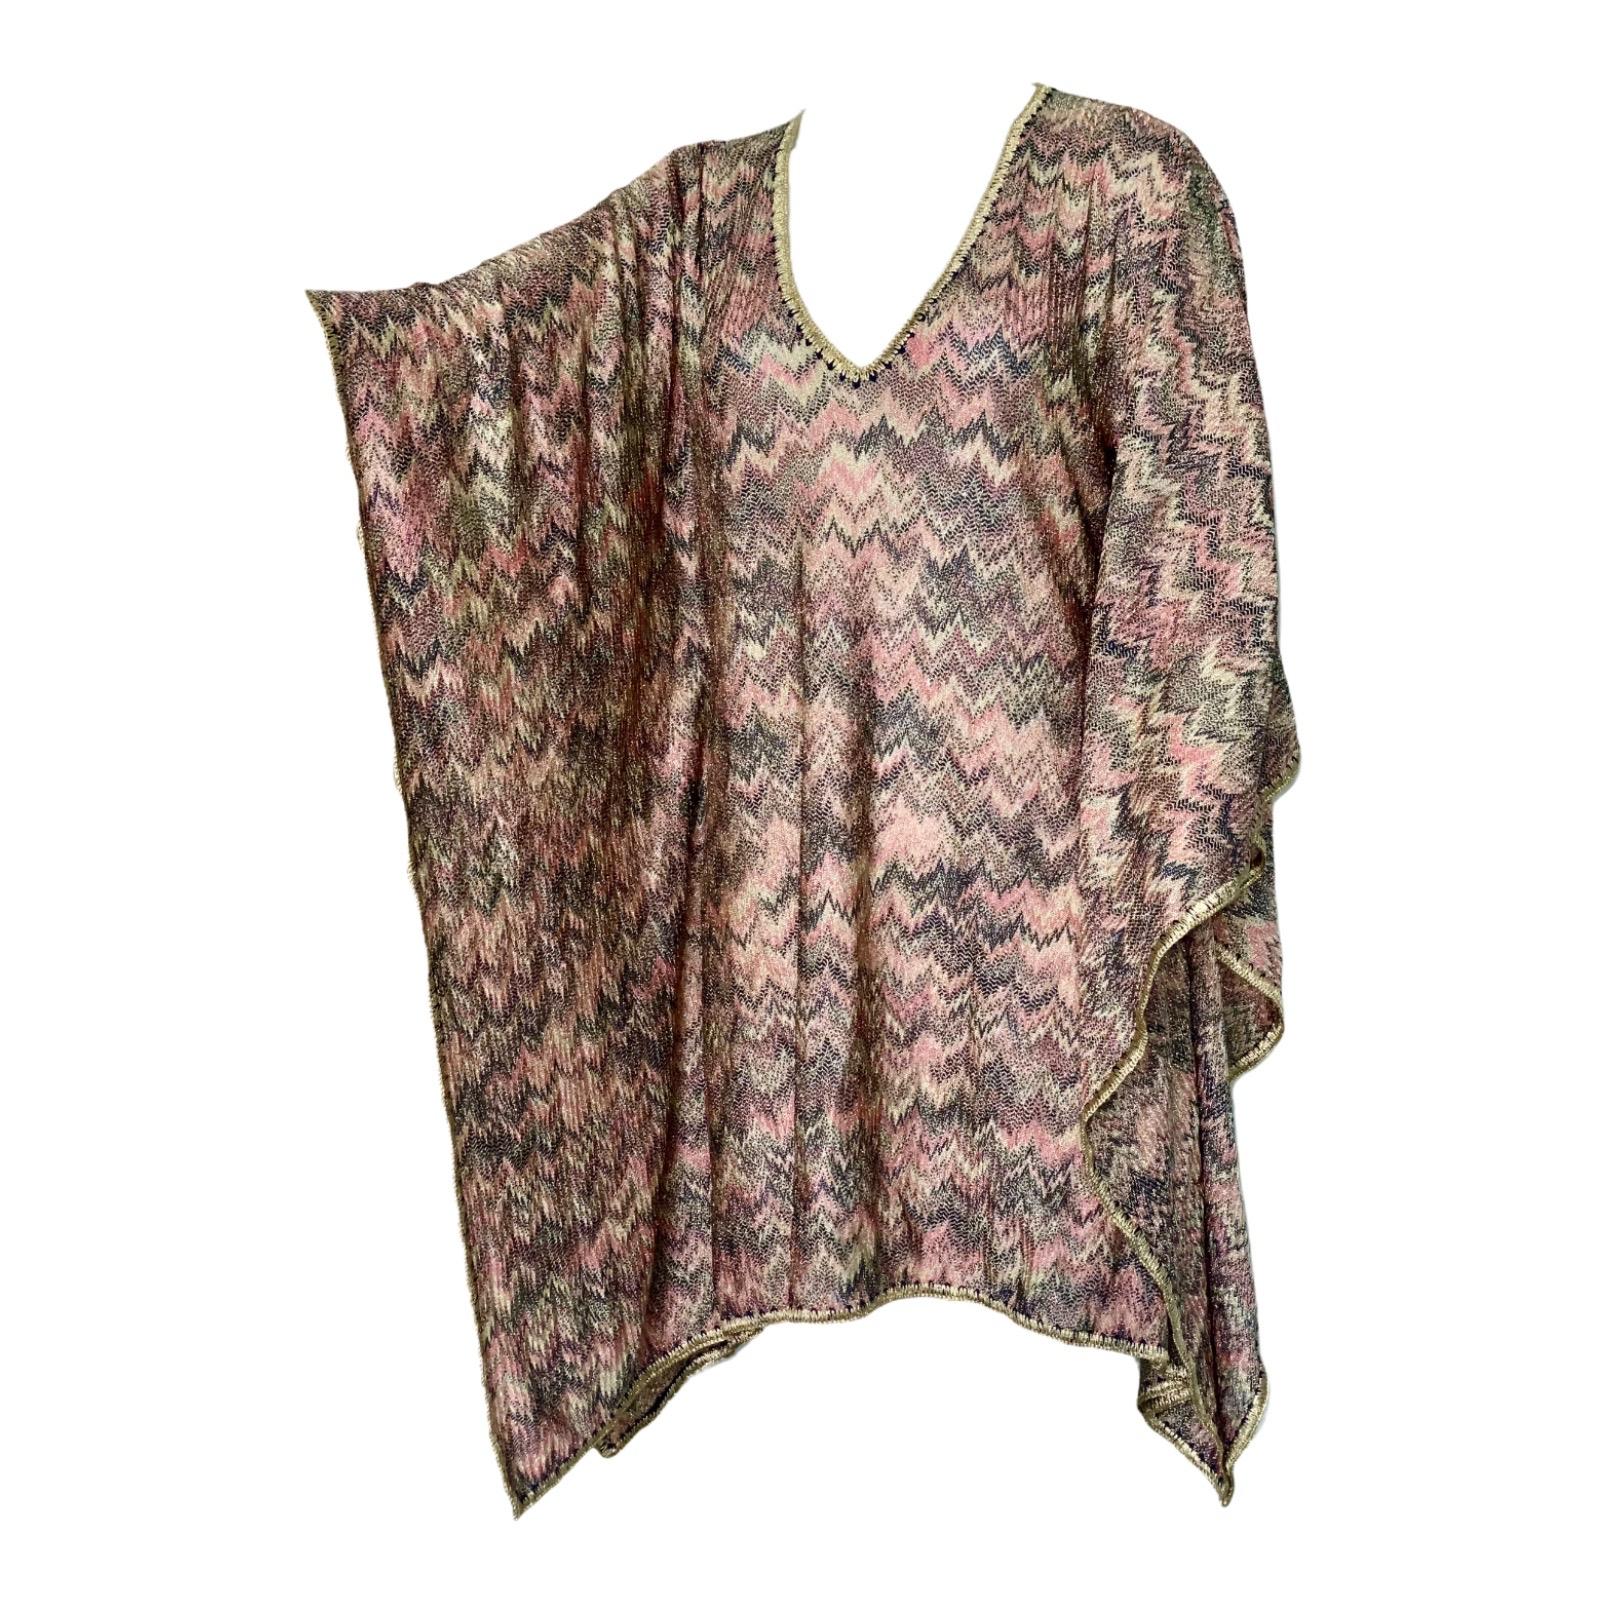 Beautiful multicolored lurex Missoni kaftan dress
Classic Missoni signature knit
Simply slips on
Golden crochet-knit detail trimming
Dry Clean only
Made in Italy
Size L
New


